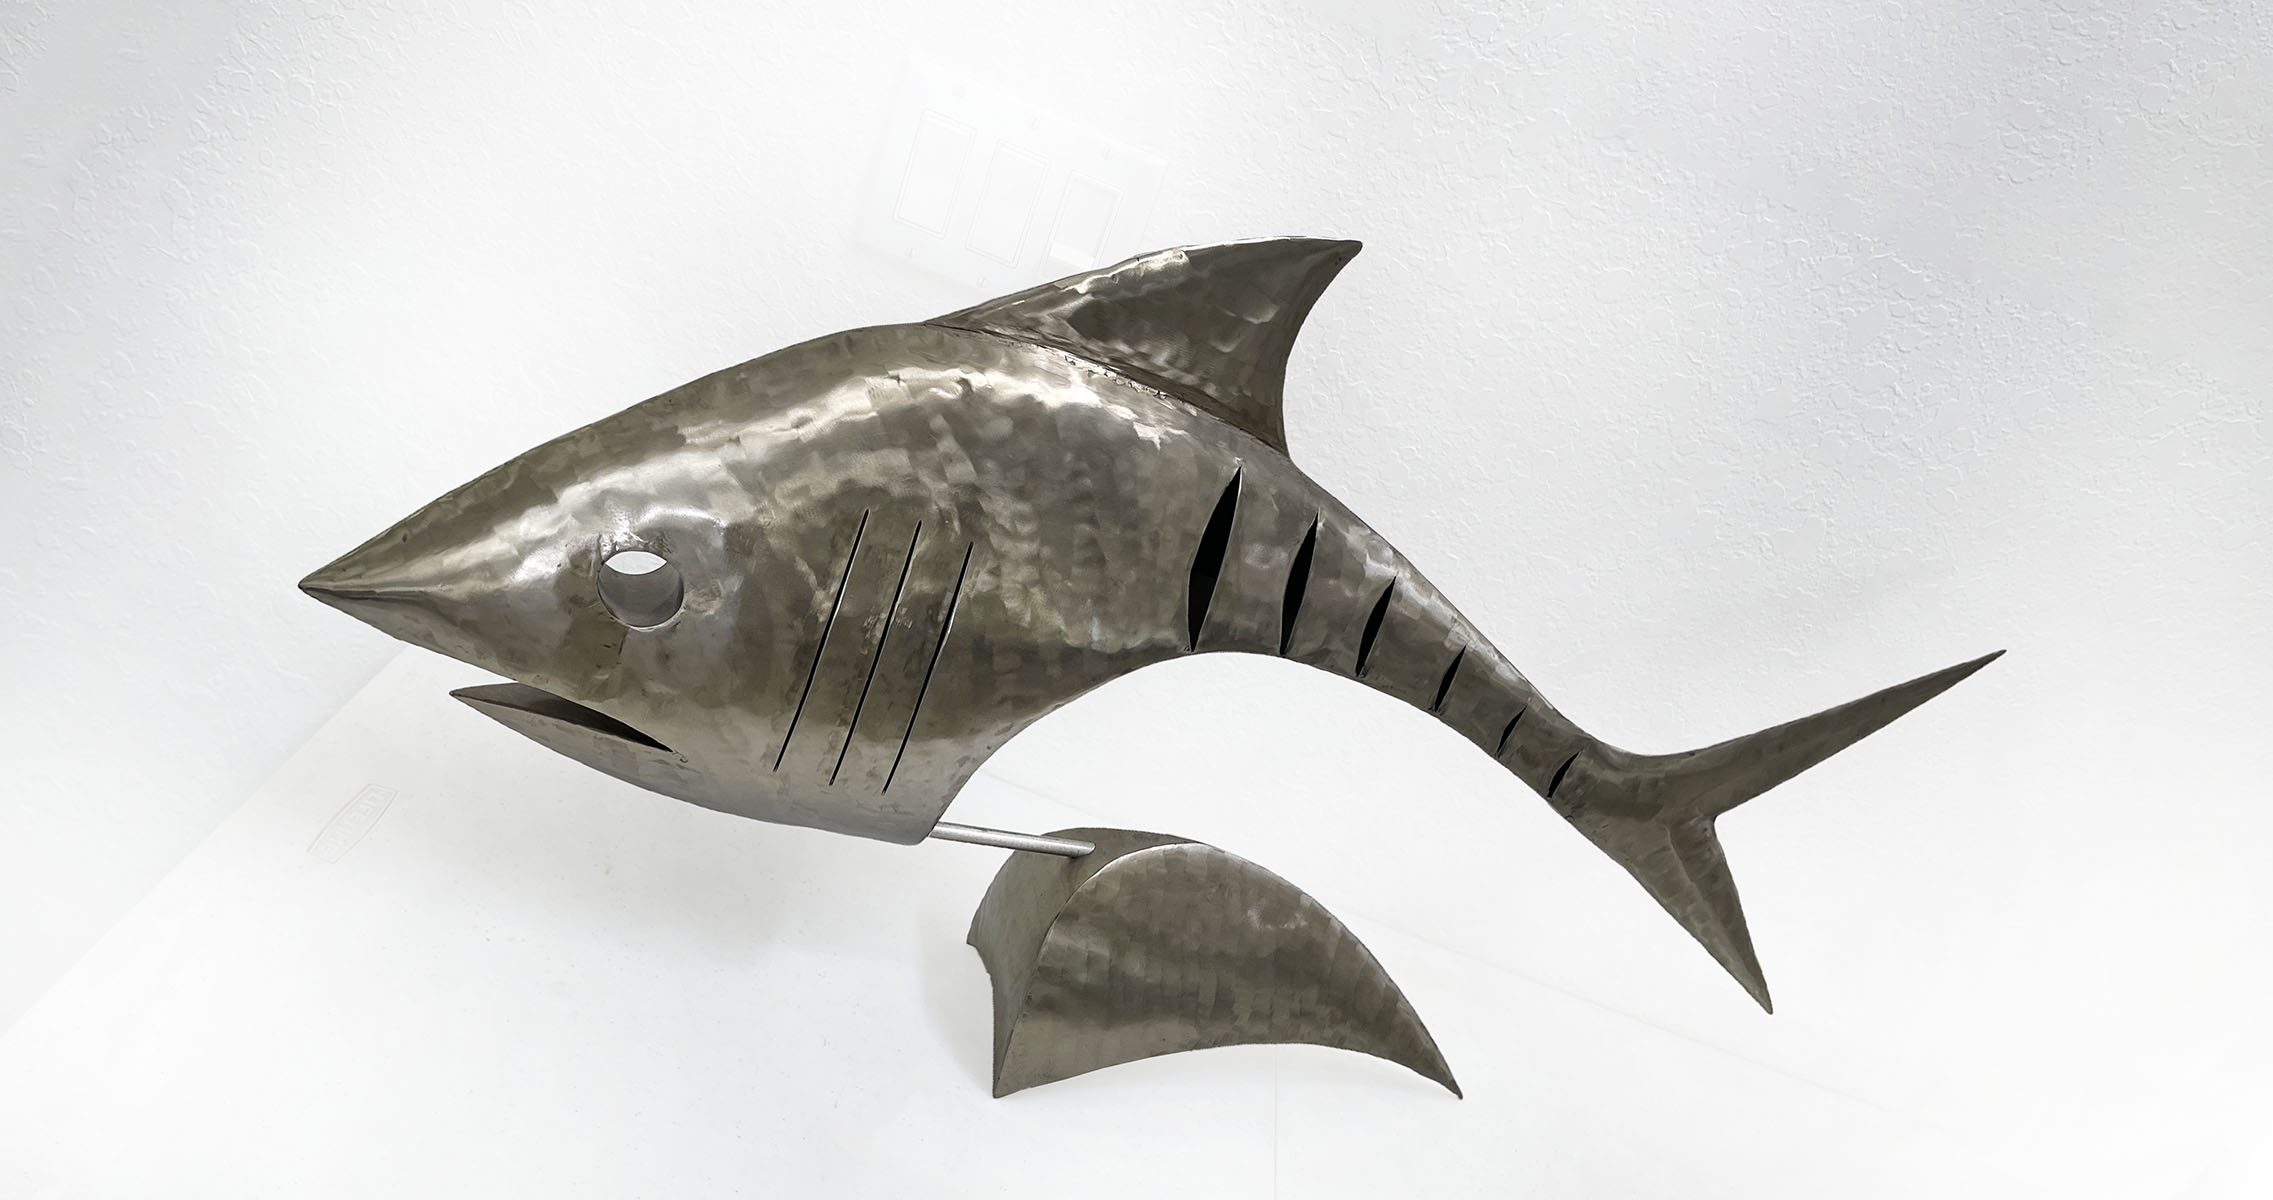 LARGE STAINLESS STEEL FOSSIL FISH 2750ba